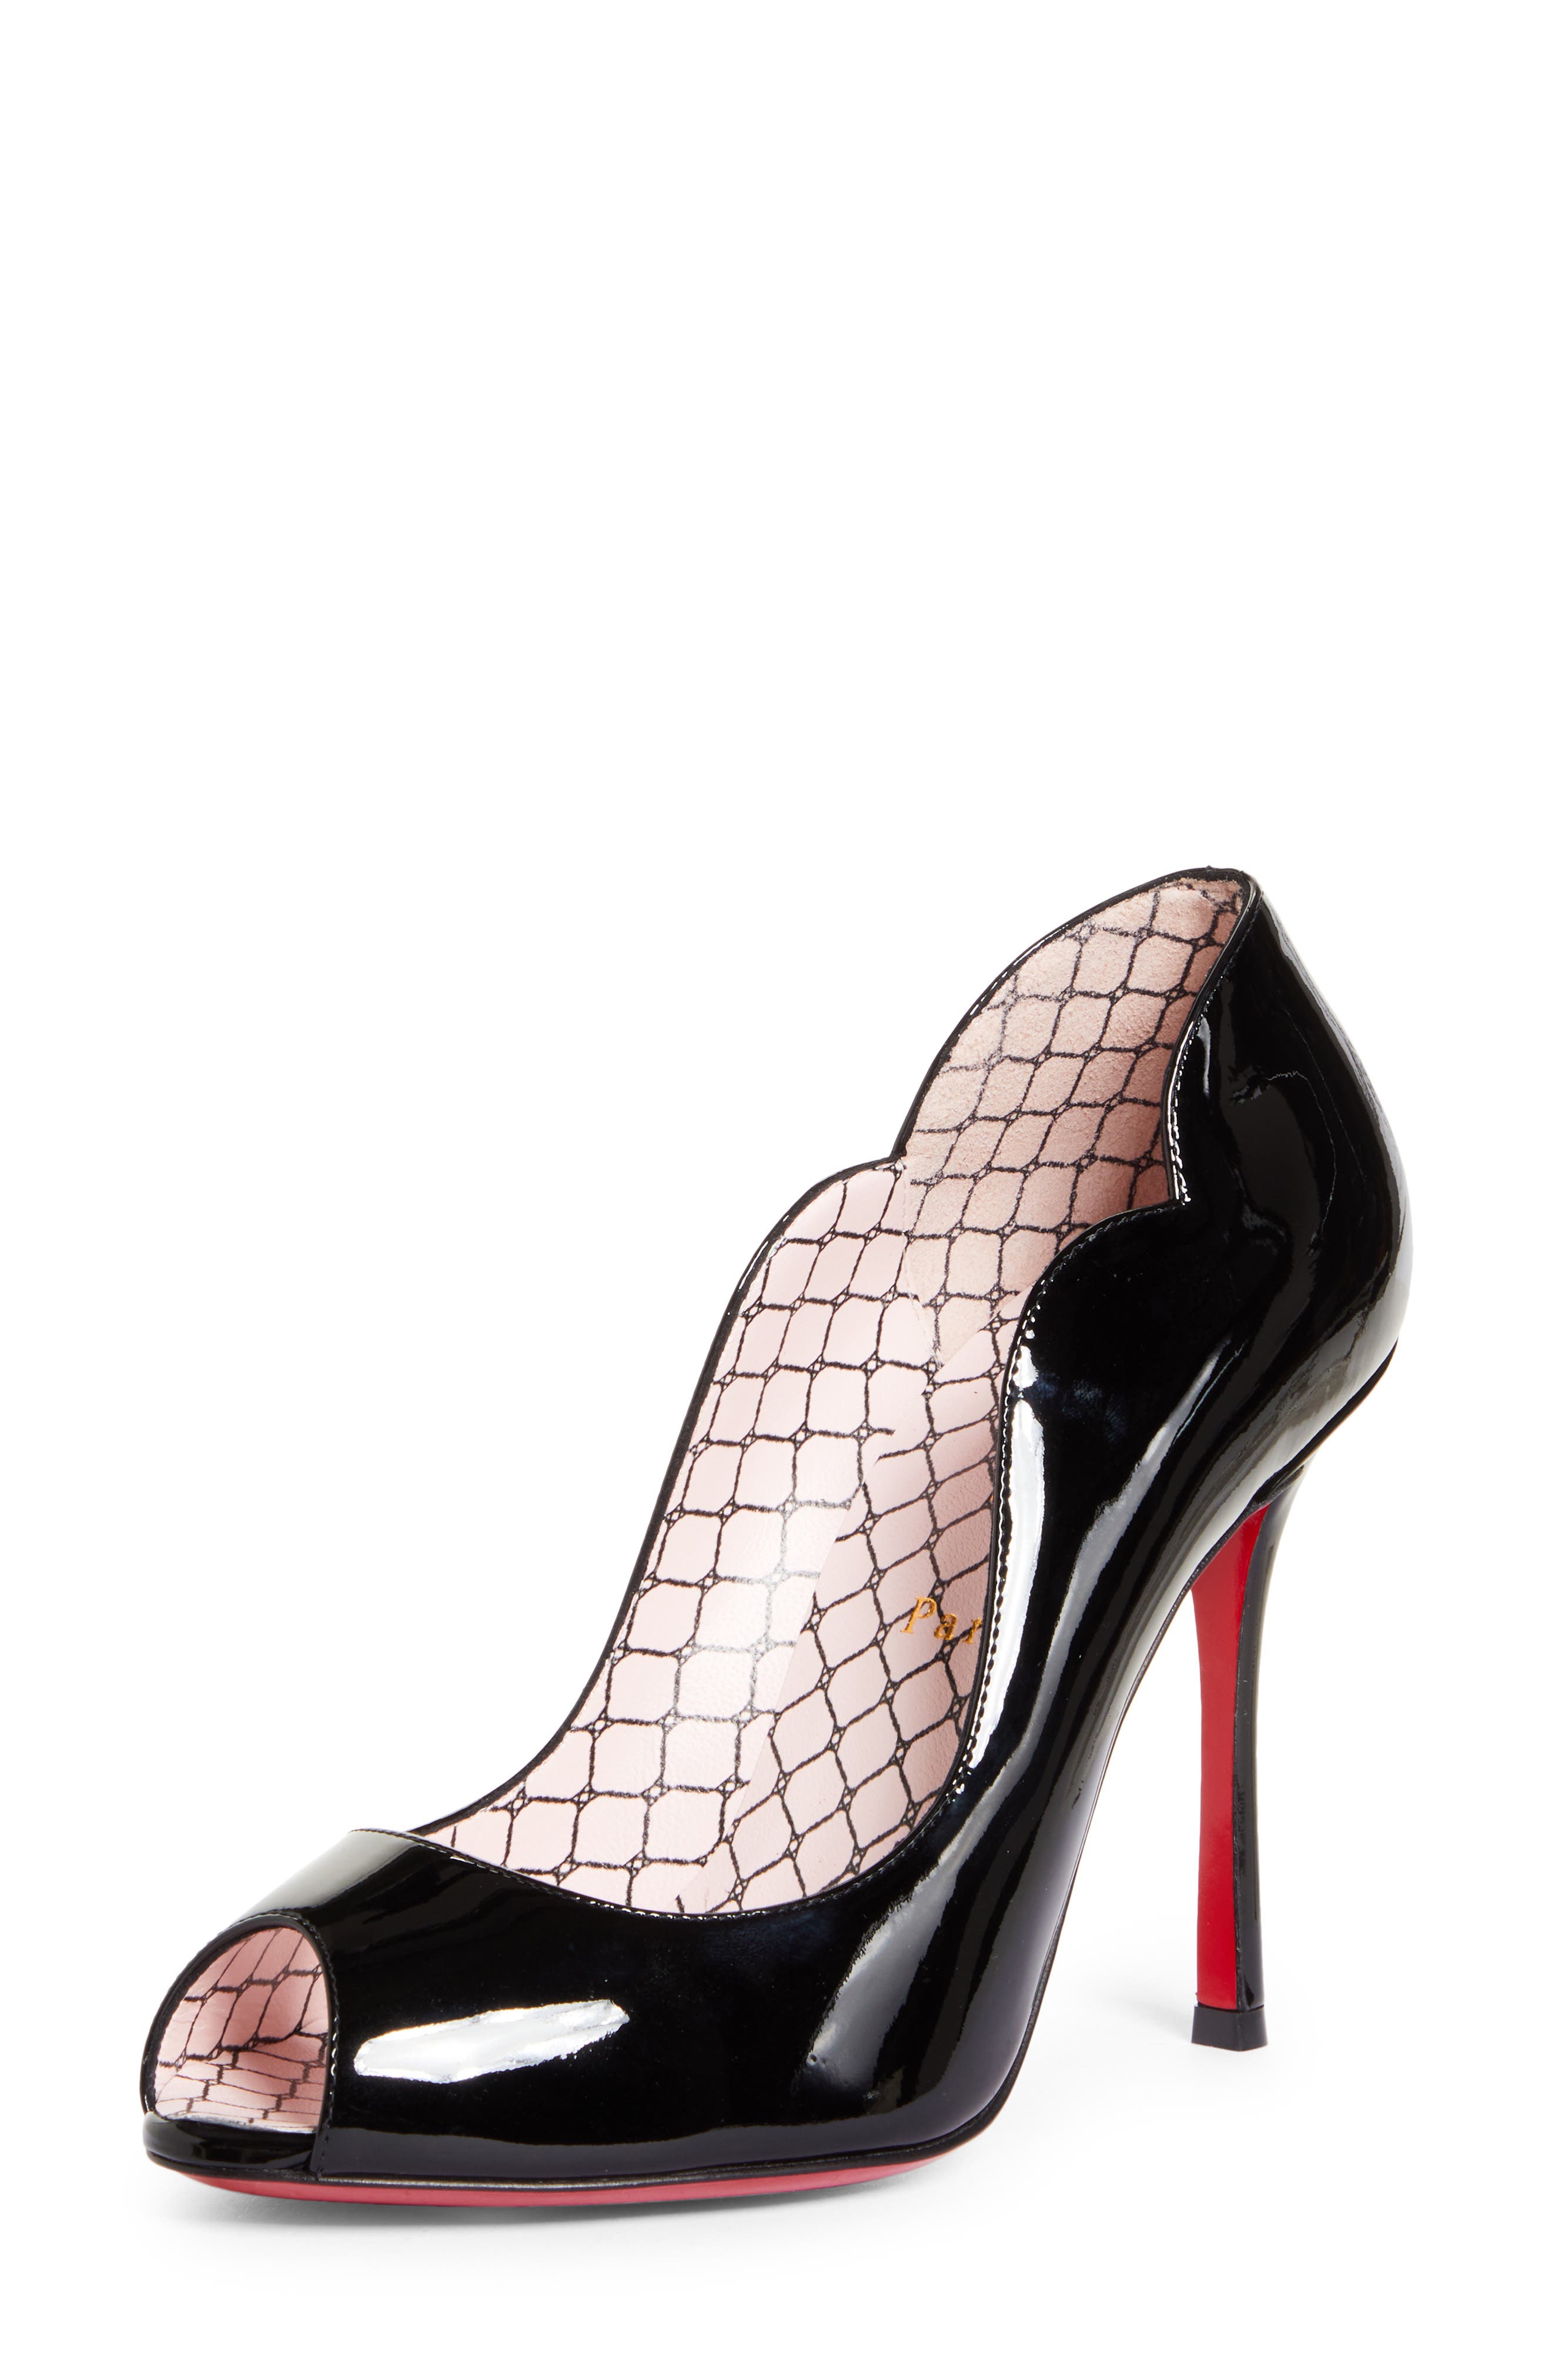 Christian Louboutin Hot Chick Pinup Peep Toe Pump in Black at Nordstrom